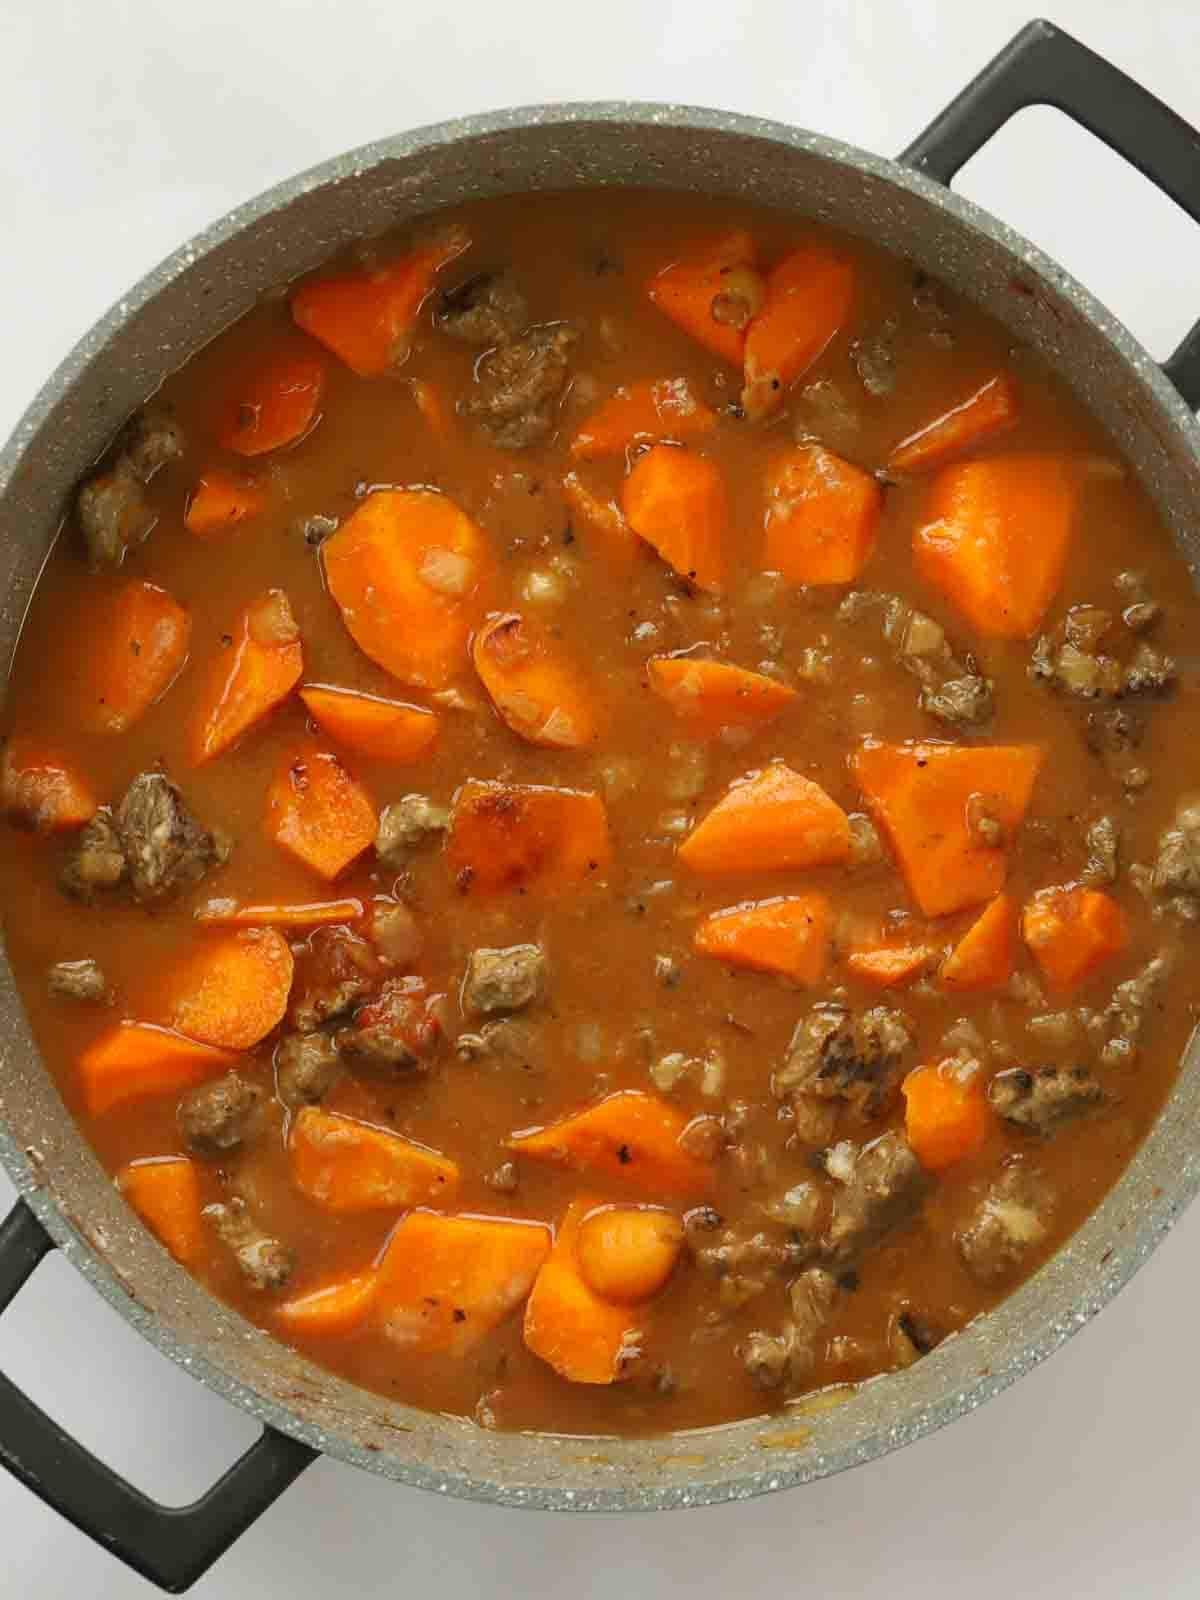 Cooked beef and carrots in a rich gravy in a large pan for step 3 in the recipe for Steak Pie.